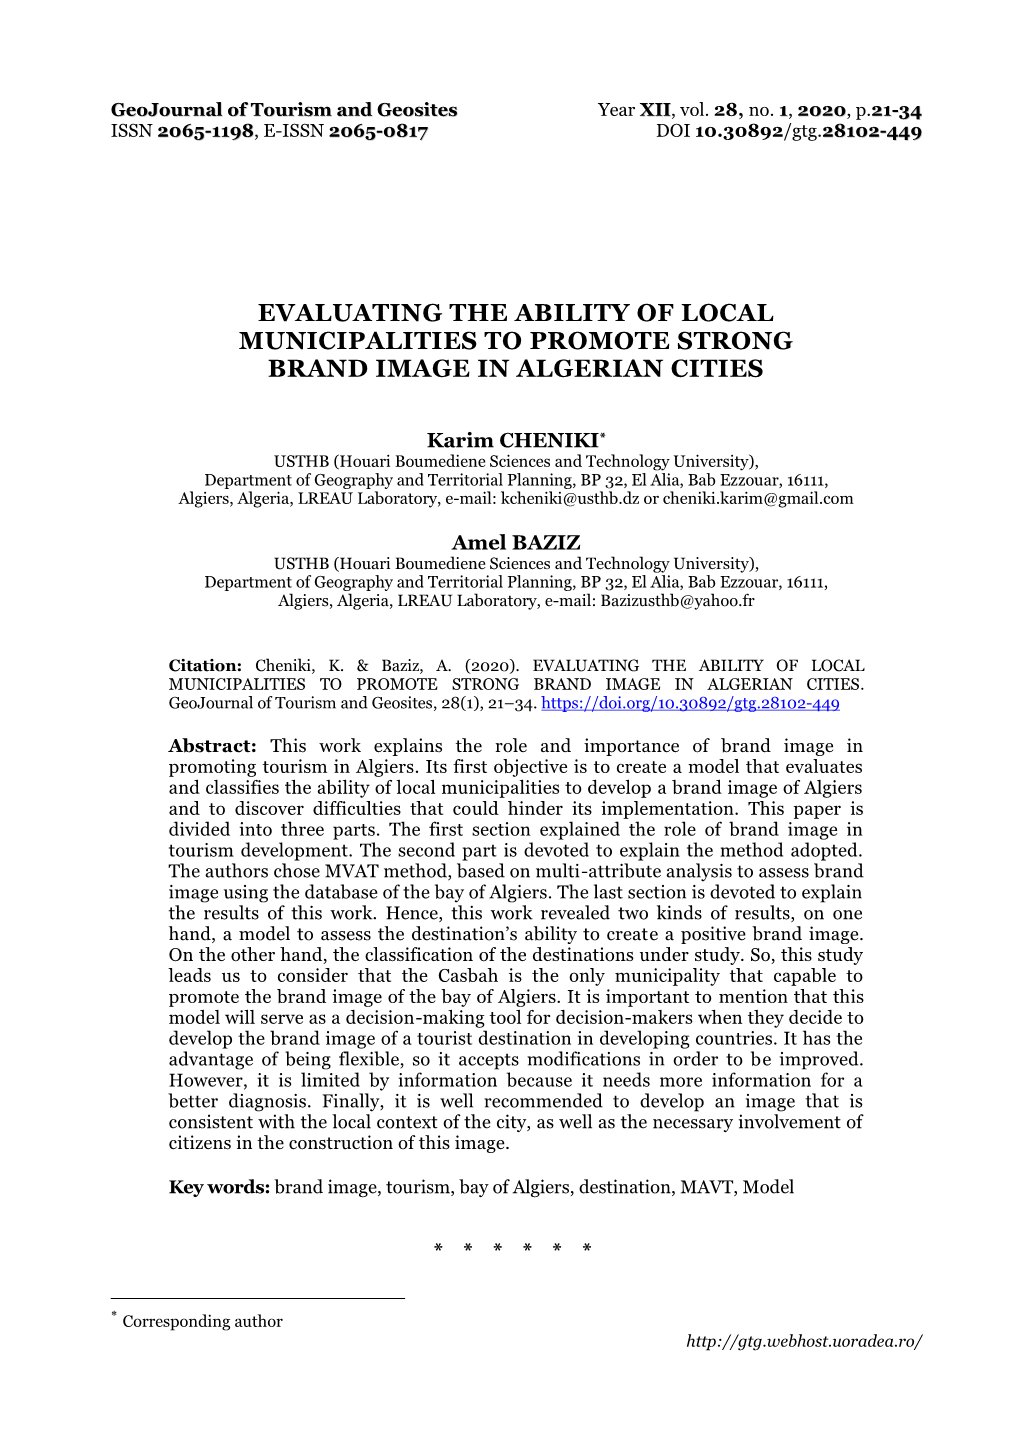 Evaluating the Ability of Local Municipalities to Promote Strong Brand Image in Algerian Cities